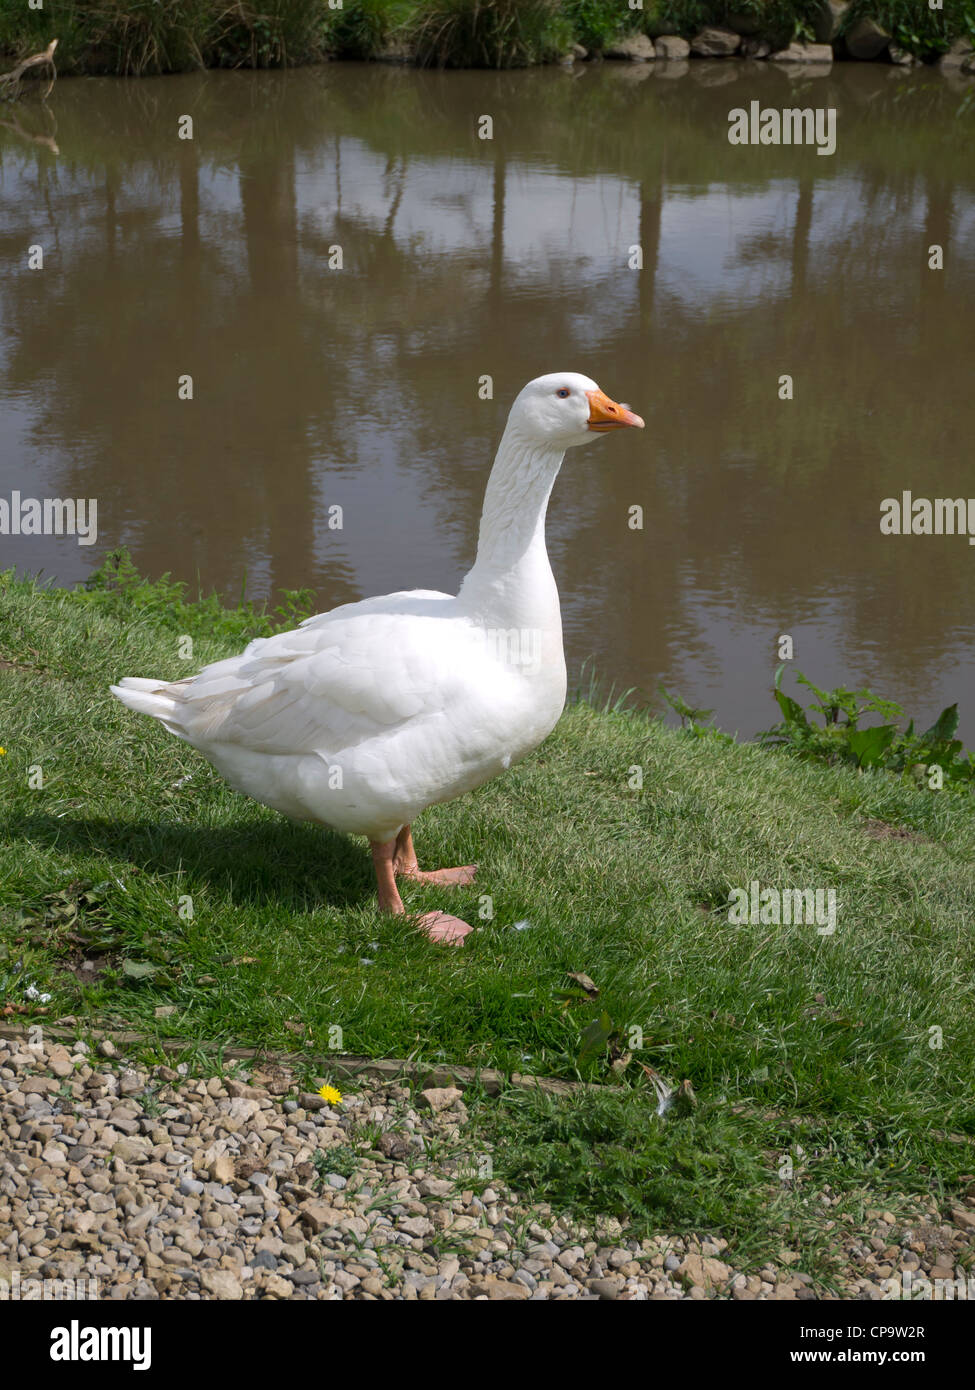 A white domestic goose standing beside a farm pond Stock Photo